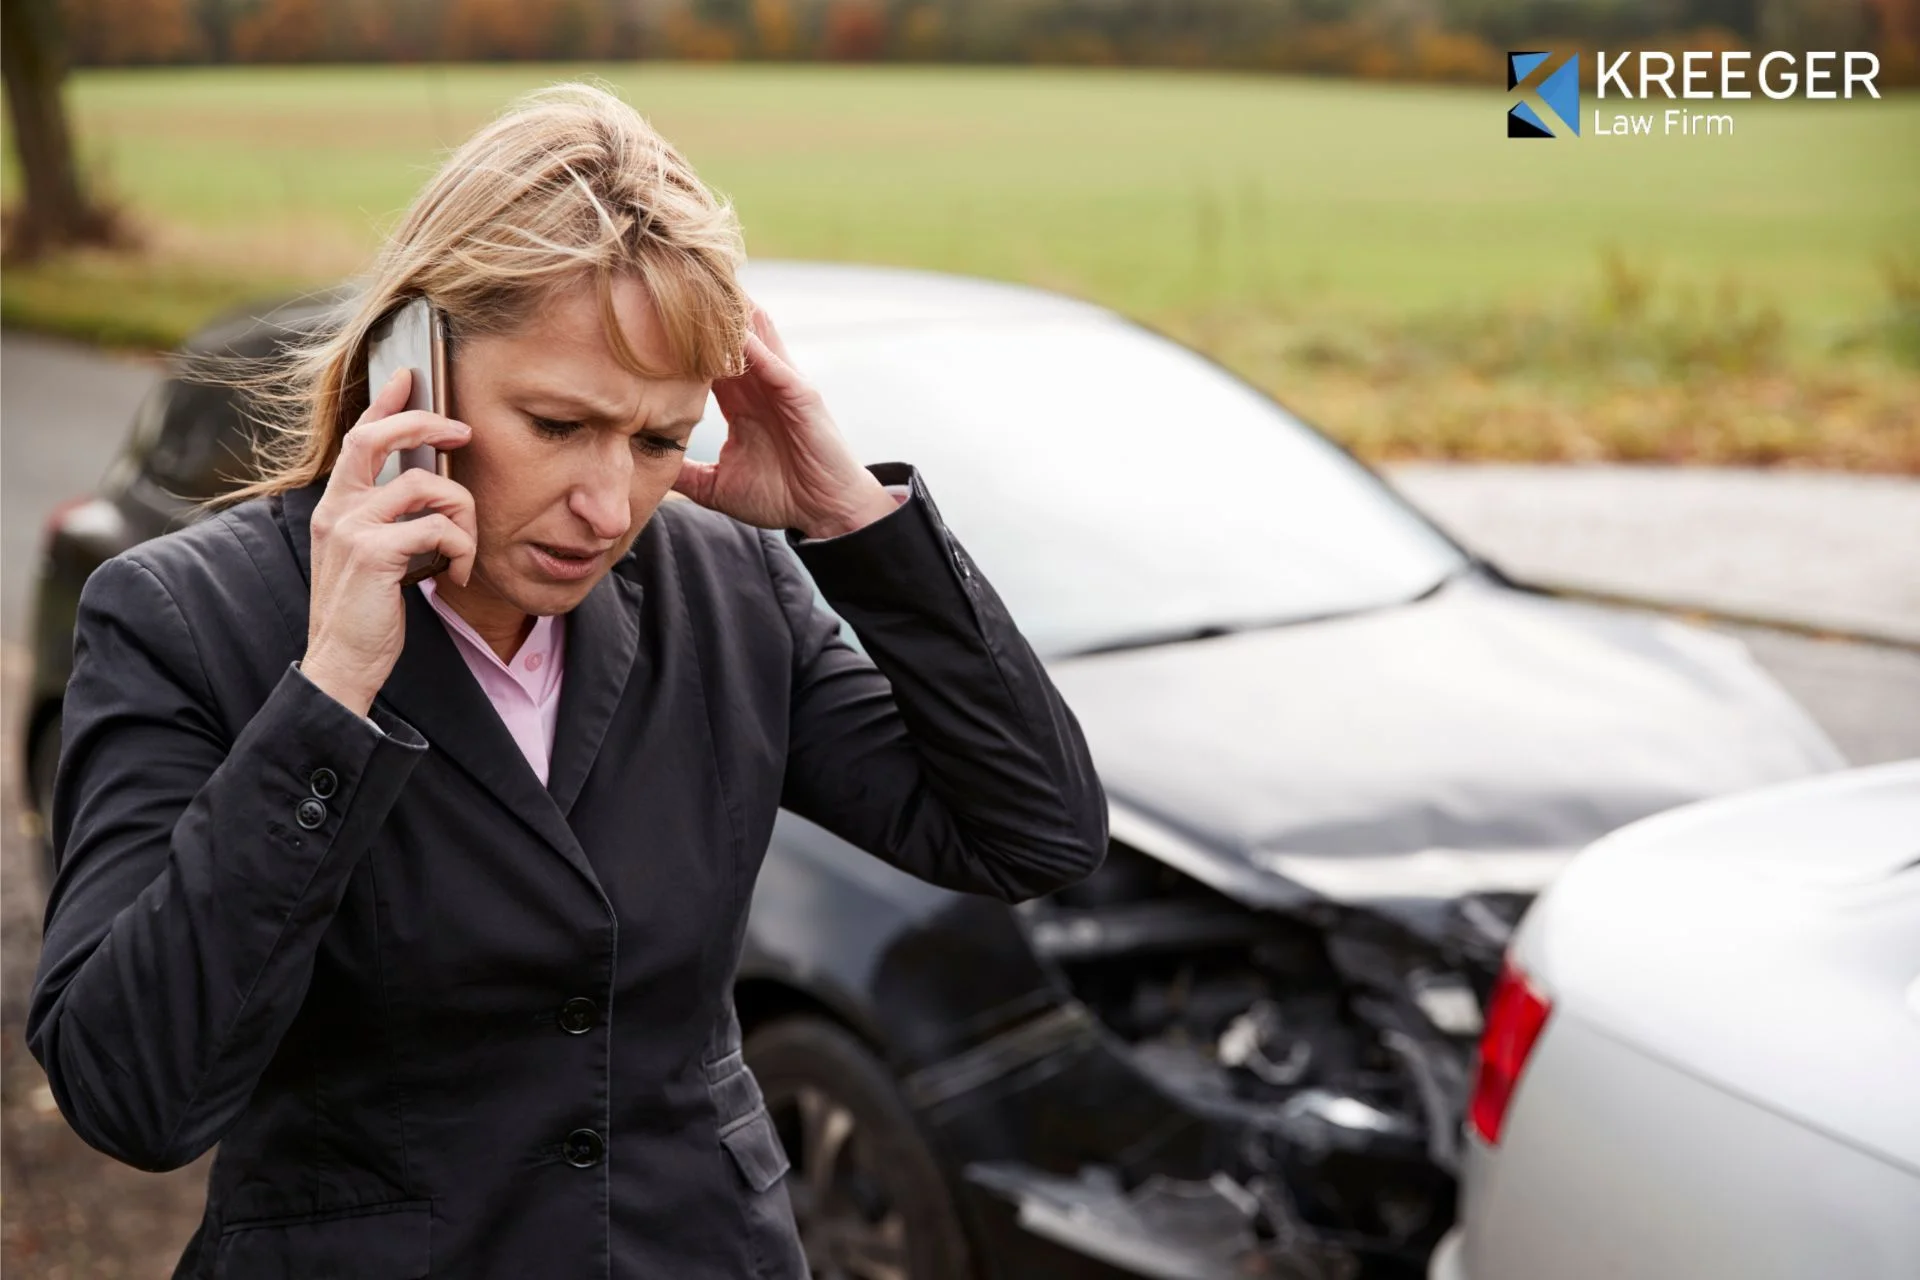 Elk Grove Rideshare Accident Lawyer